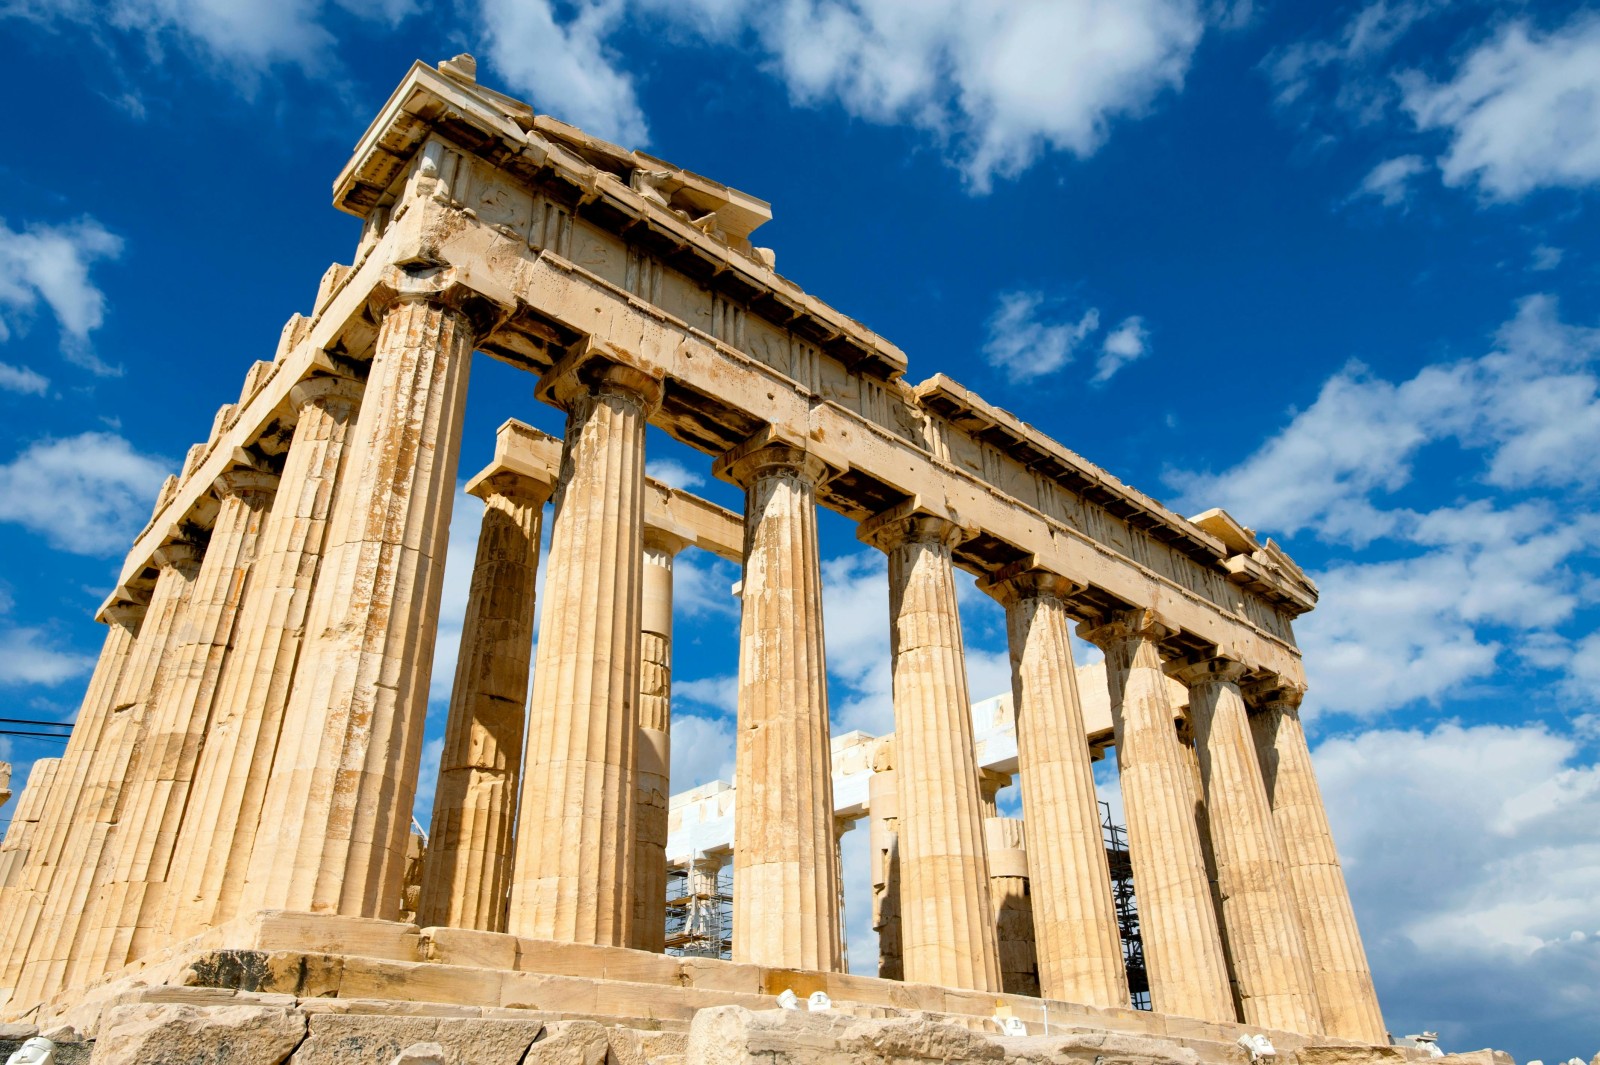 A Photo of Ancient Greek architecture featuring fluted columns